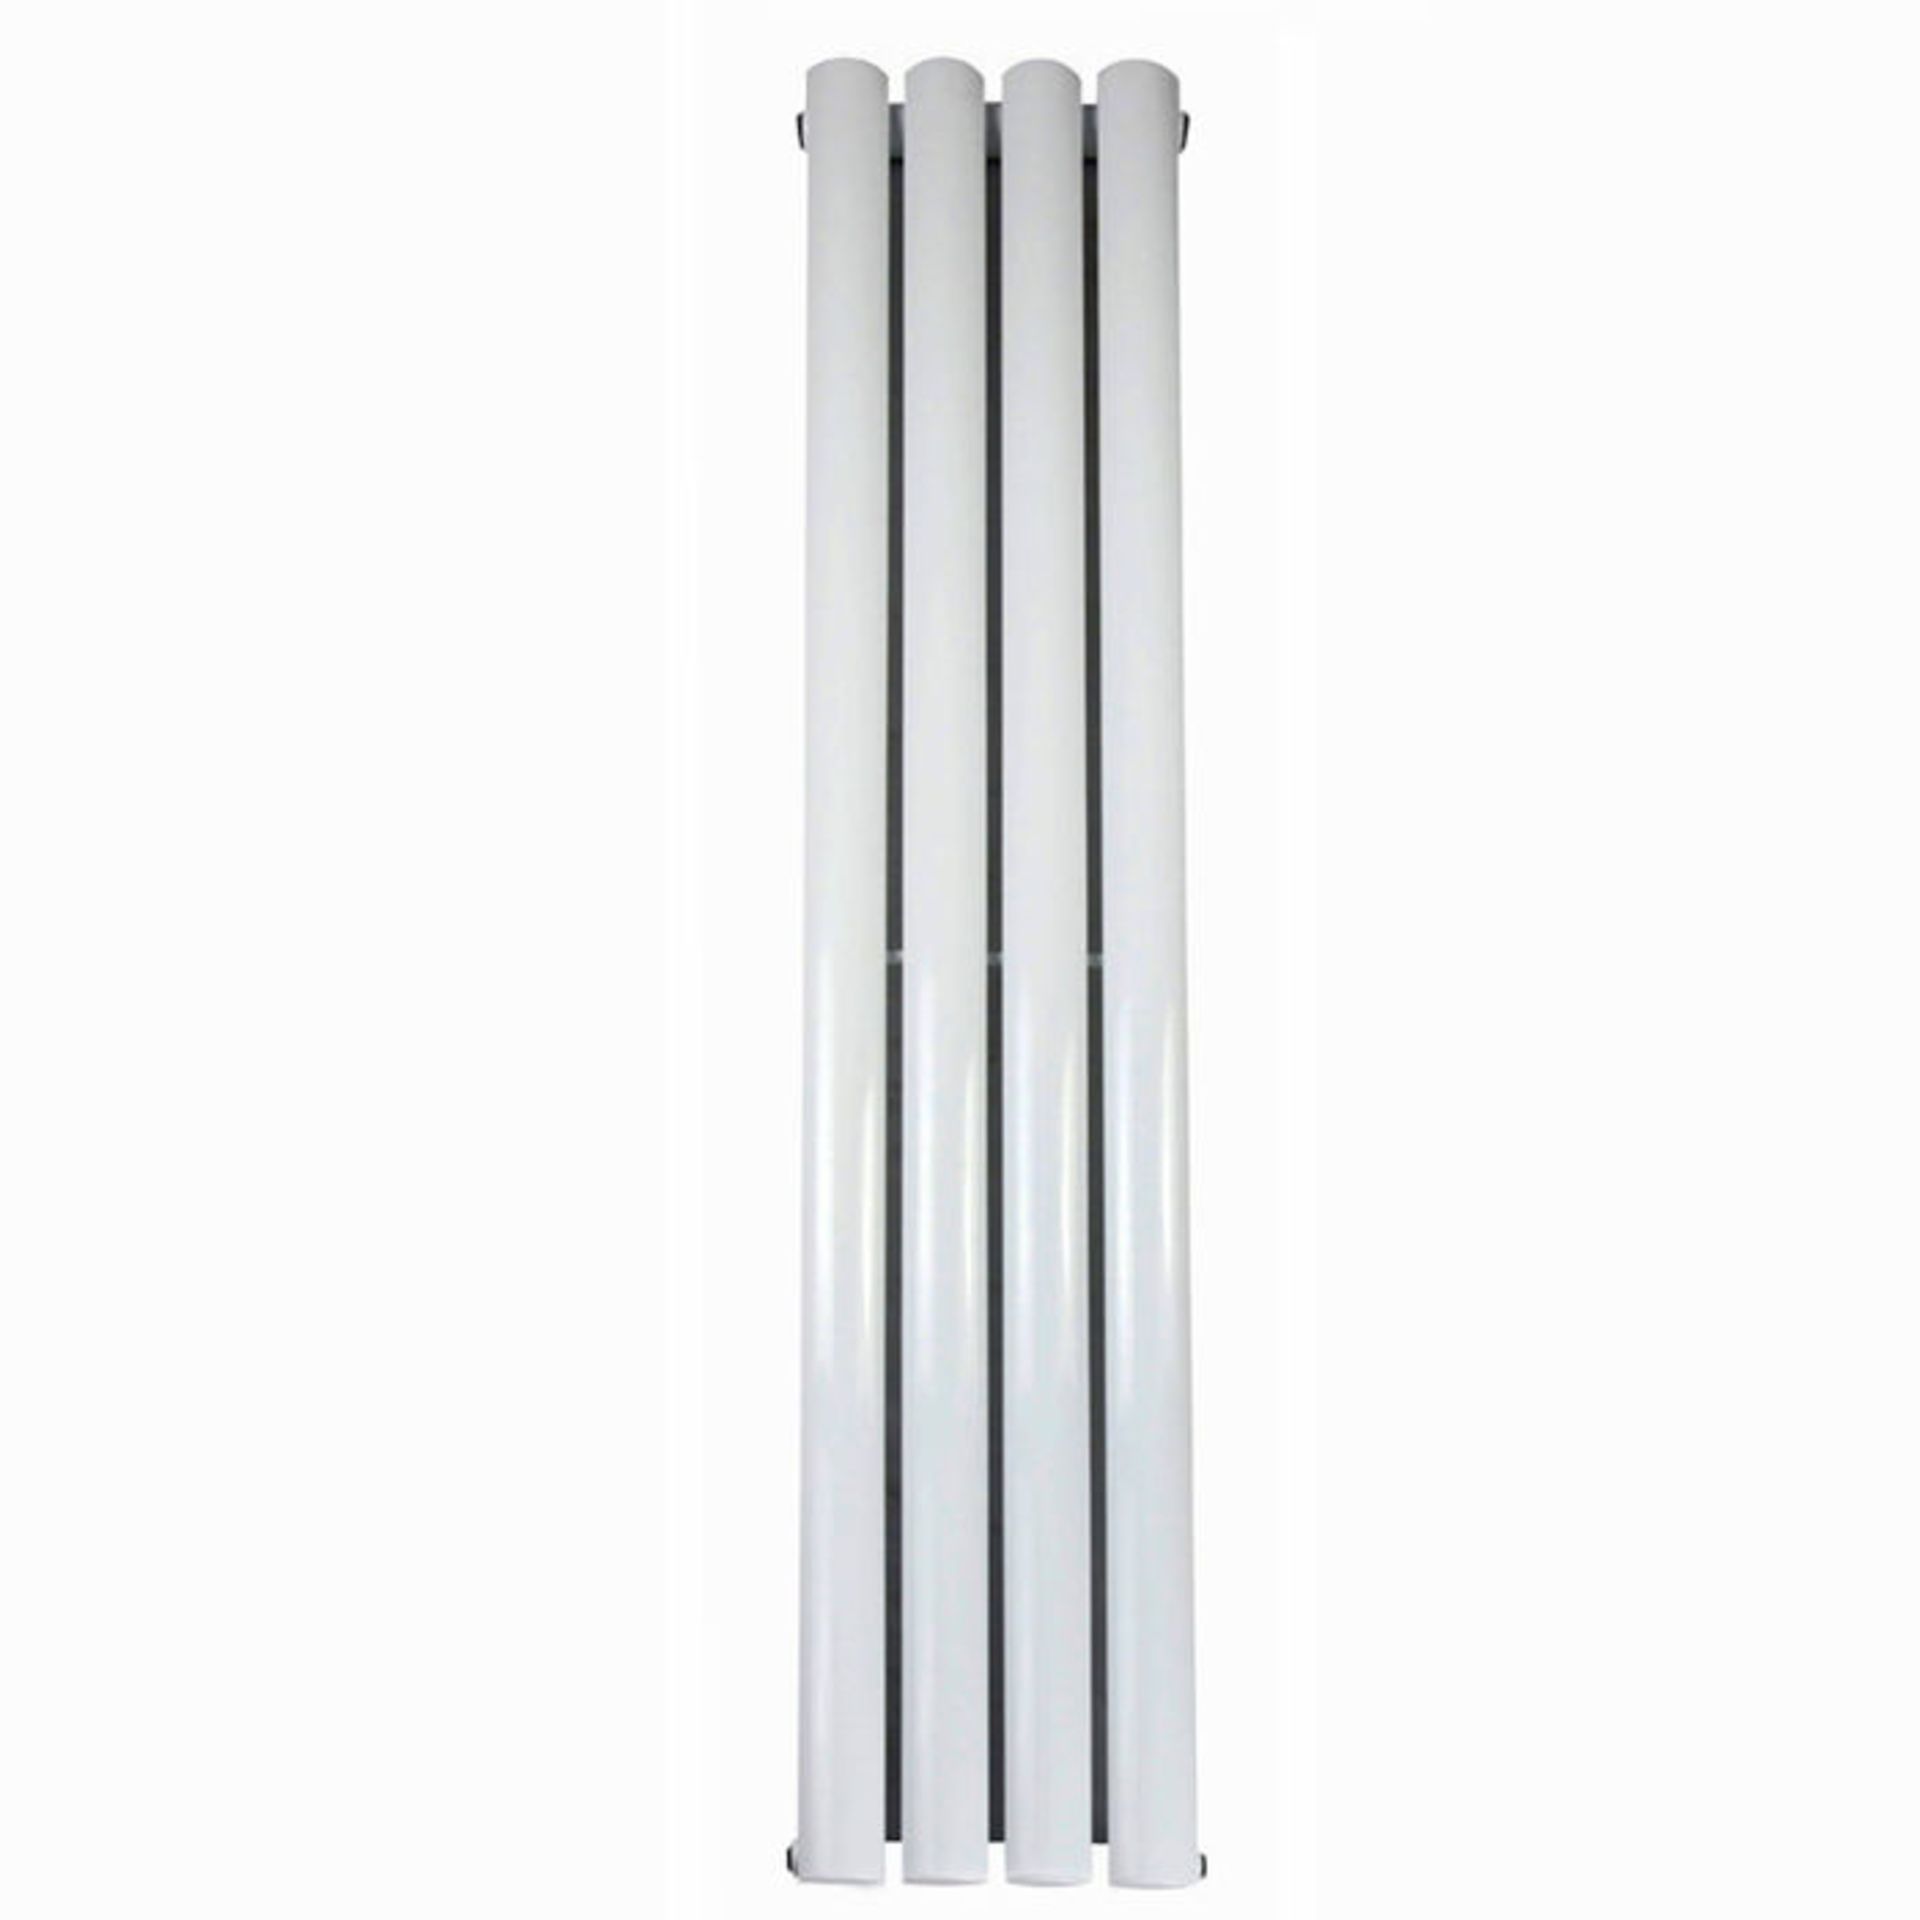 (G49) 1600x240mm Gloss White Single Oval Tube Vertical Radiator. Low carbon steel, high quality - Image 3 of 3